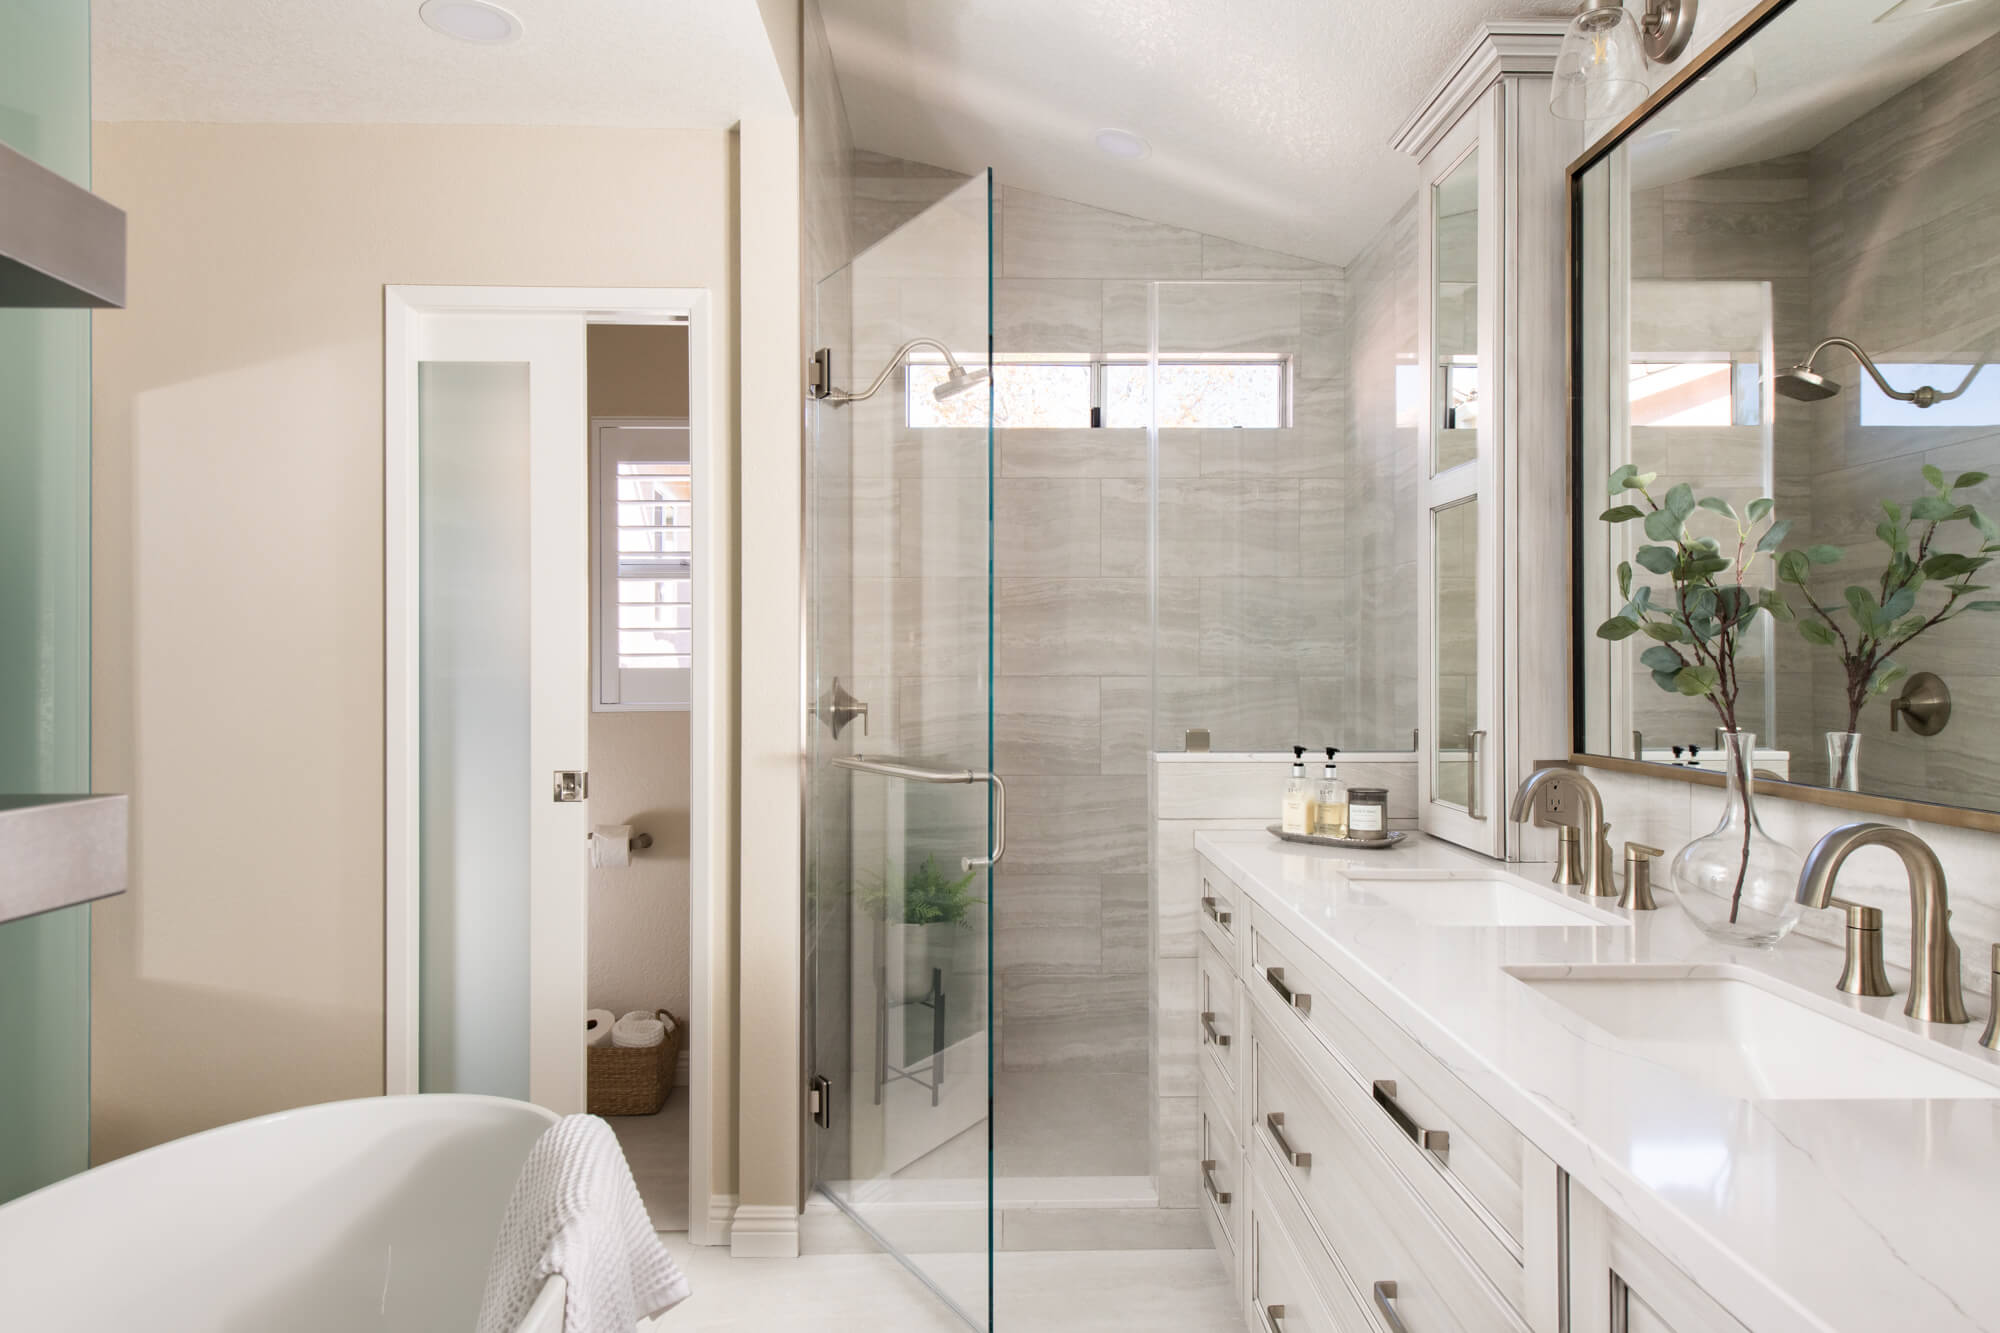 Walk-in shower and dual vanity in Foothill Ranch bathroom remodel